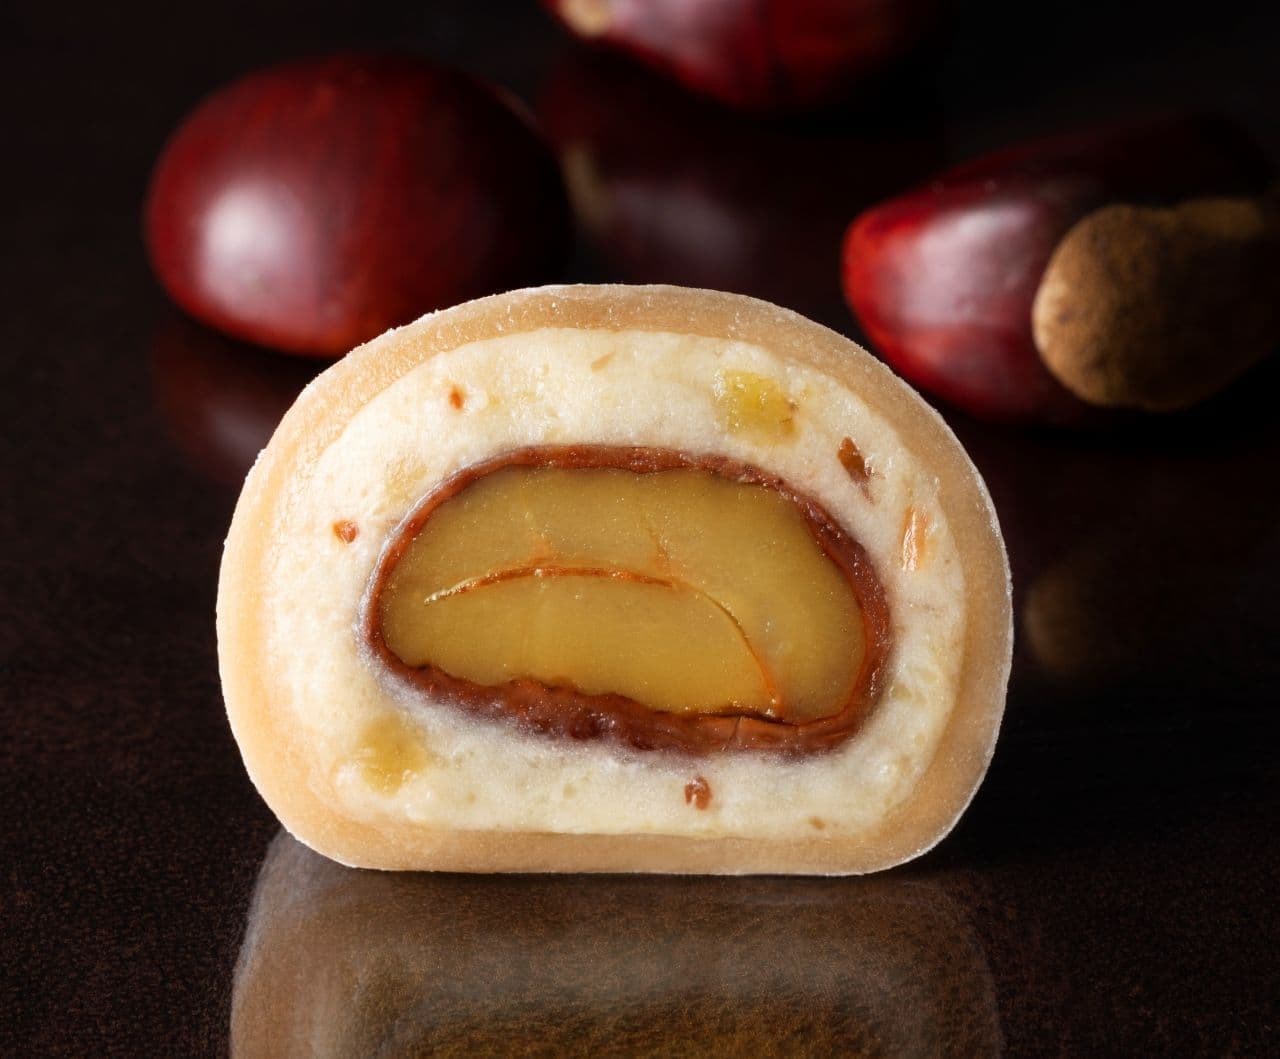 Kameya Mannendo: "Large Japanese Chestnut Daifuku" and "Japanese Chestnut Mont Blanc Daifuku", a luxurious taste of Japanese chestnuts, available in November for a limited time only.